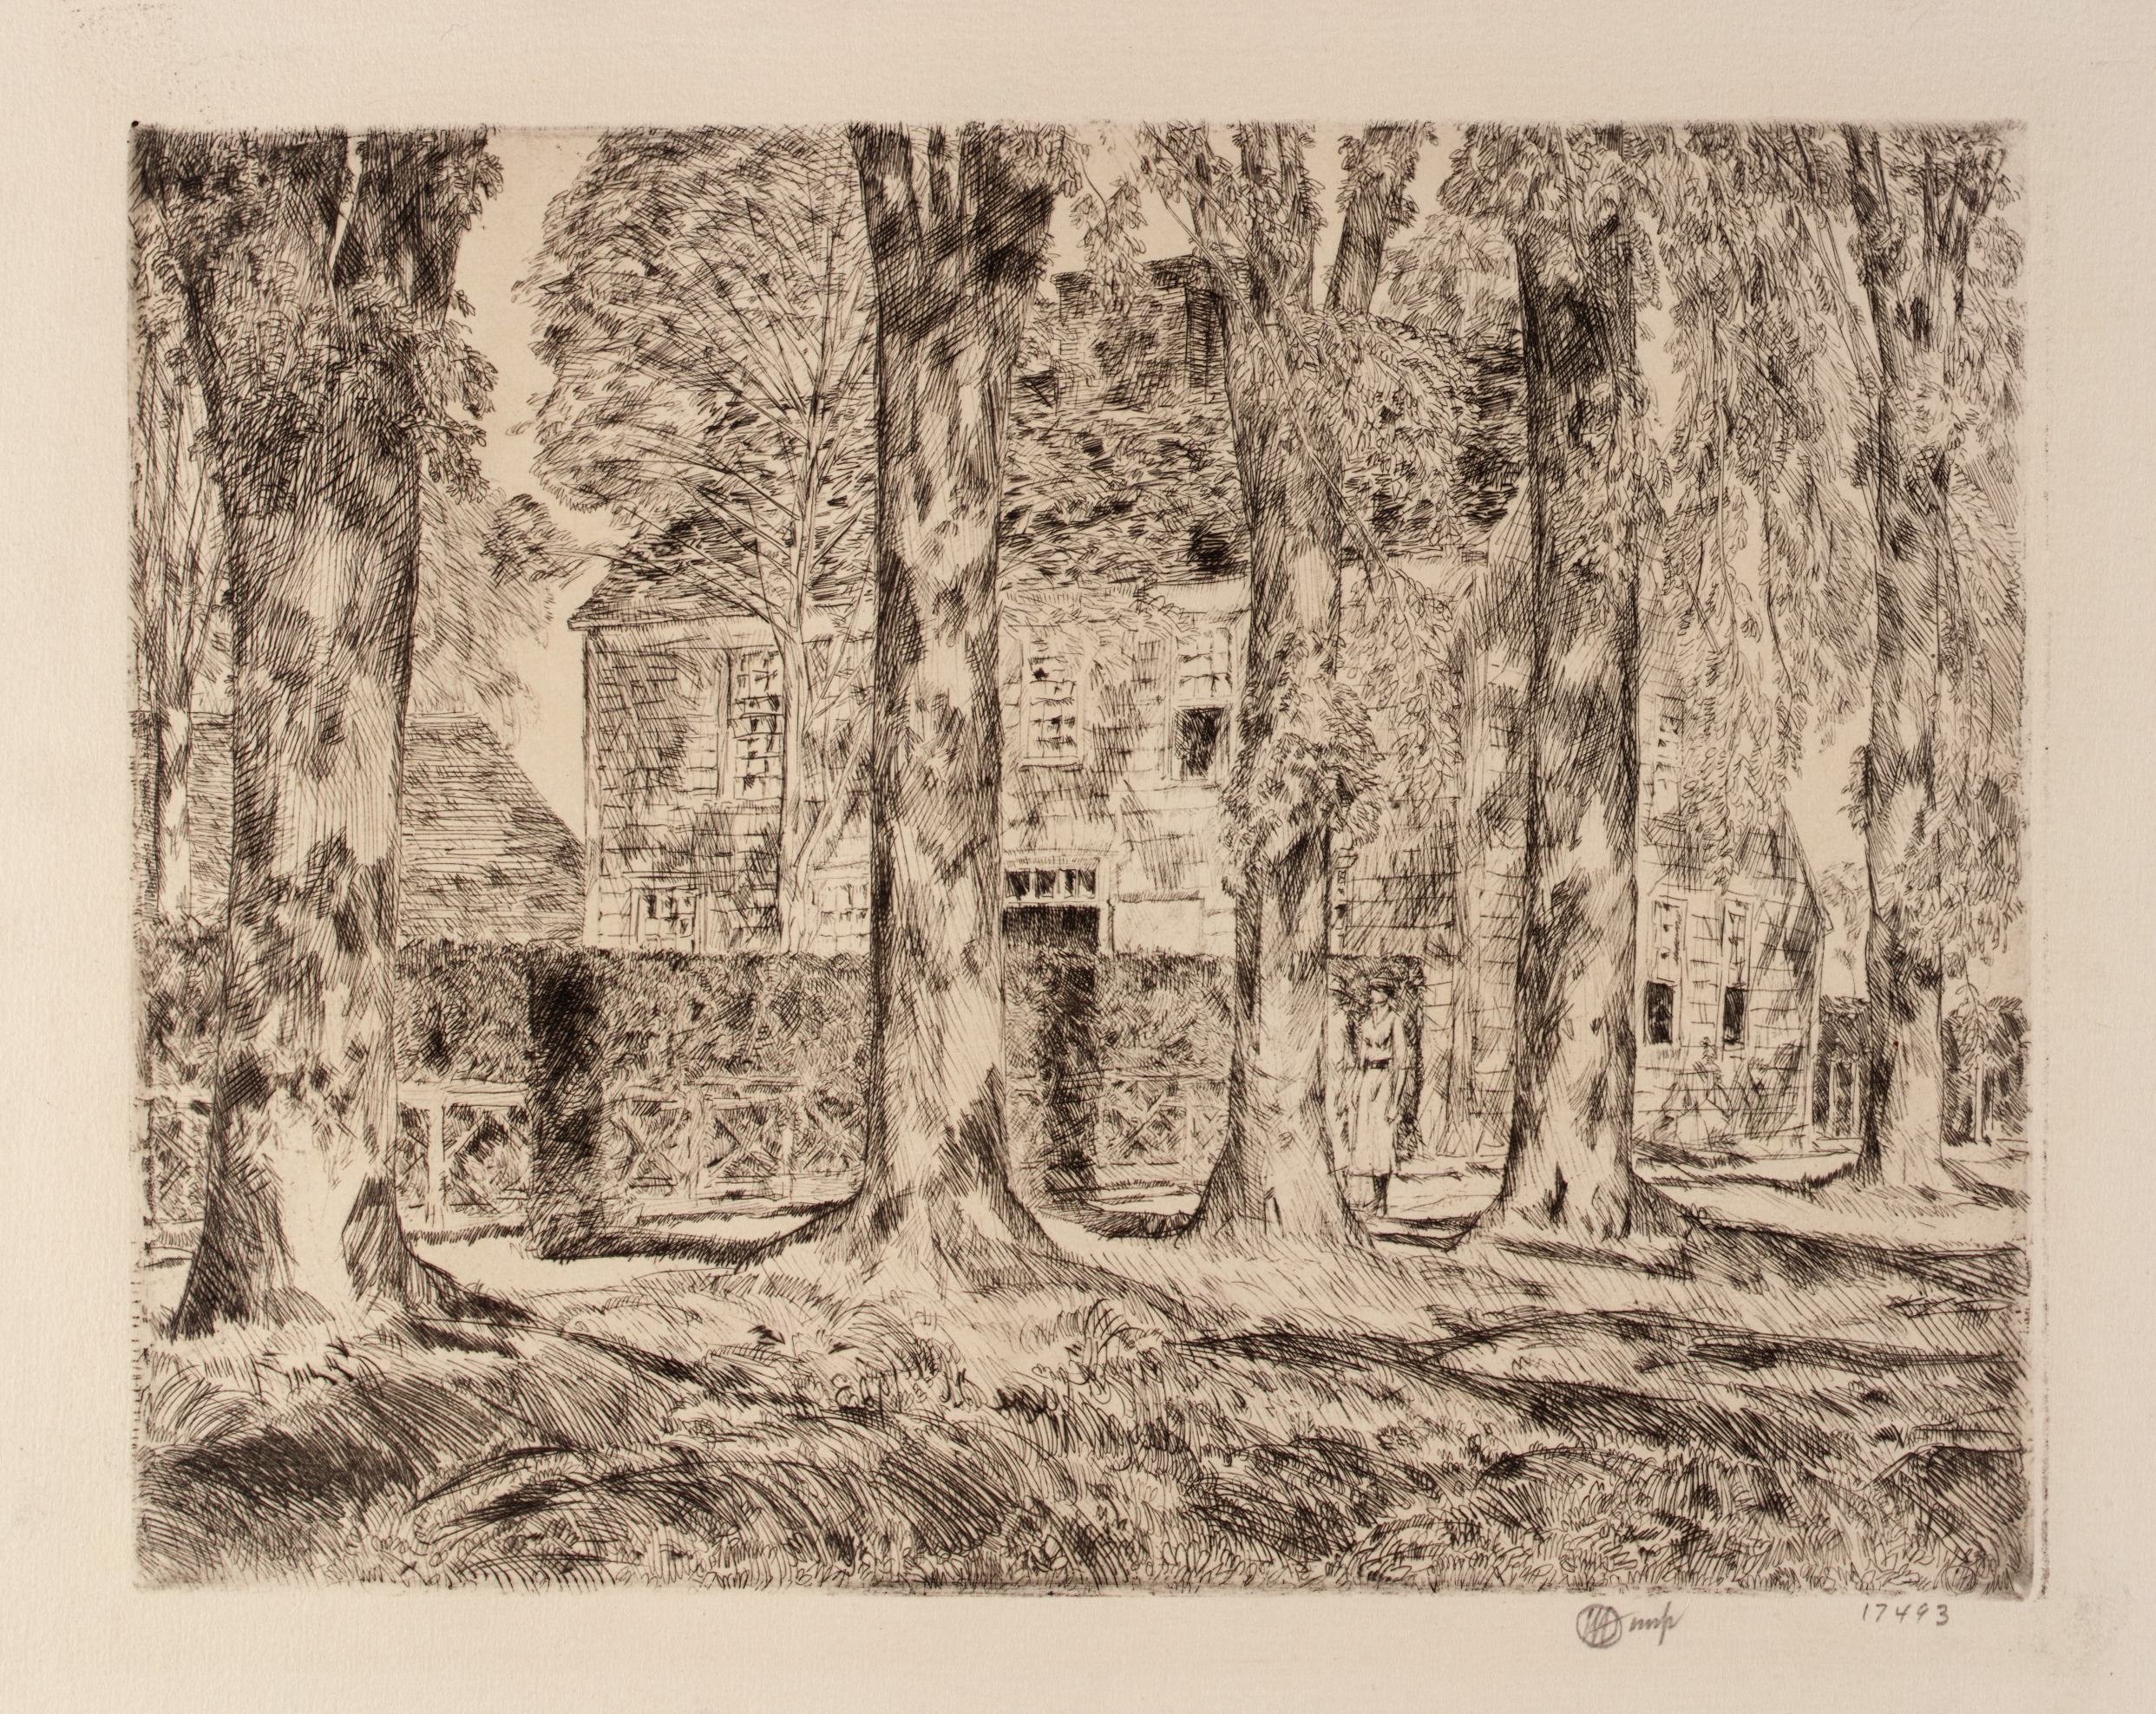  An etching by Childe Hassam: "The Village Elms," Easthampton (1923).